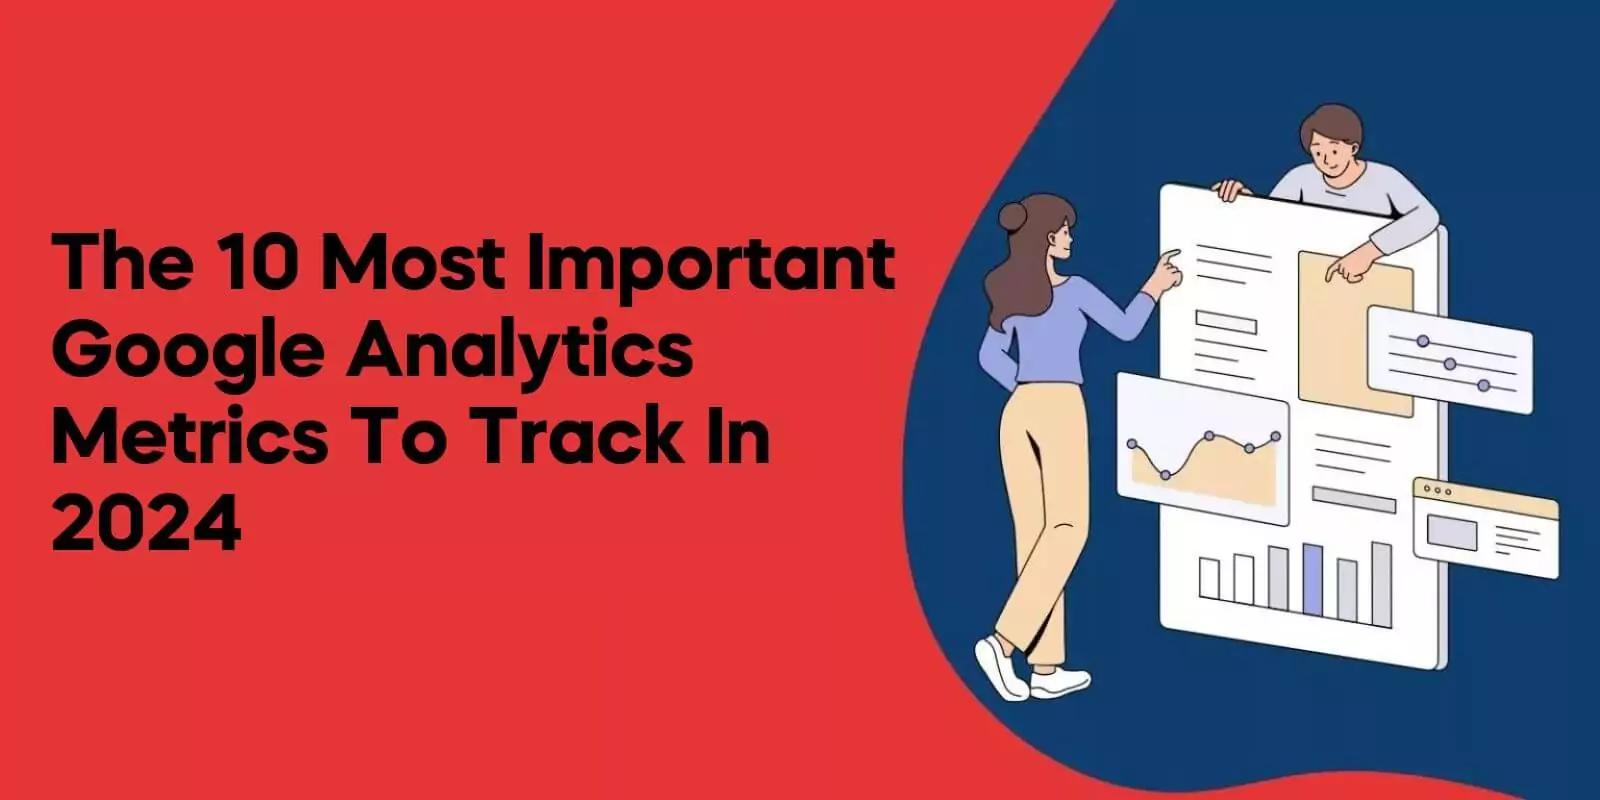 The 10 Most Important Google Analytics Metrics to Track in 2024